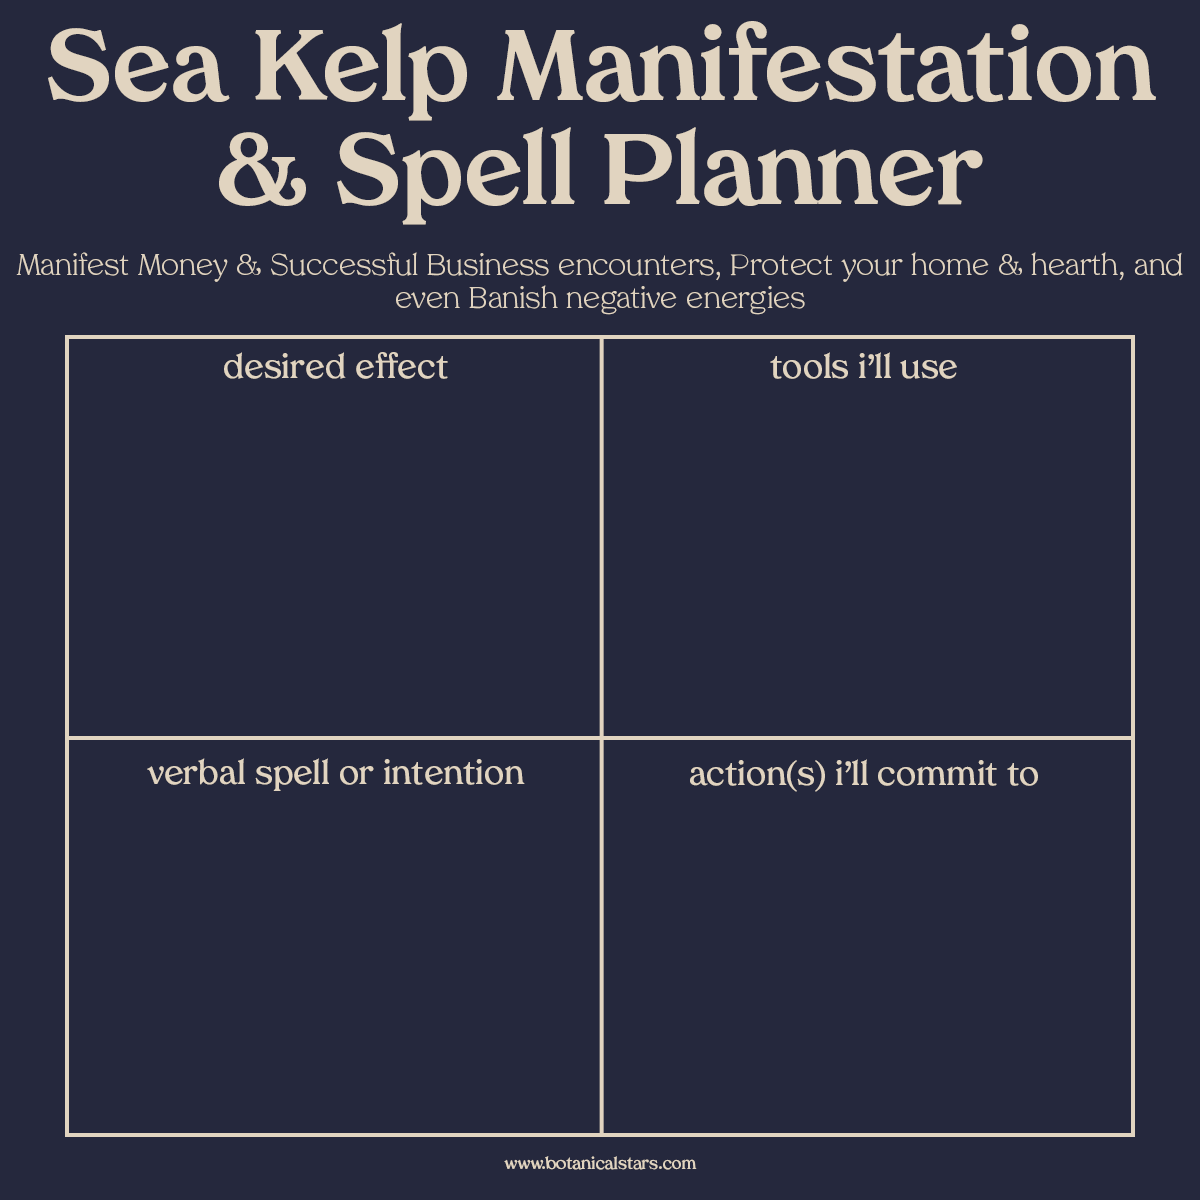 spell planner guide for manifesting and spell casting with sea kelp or bladderwack